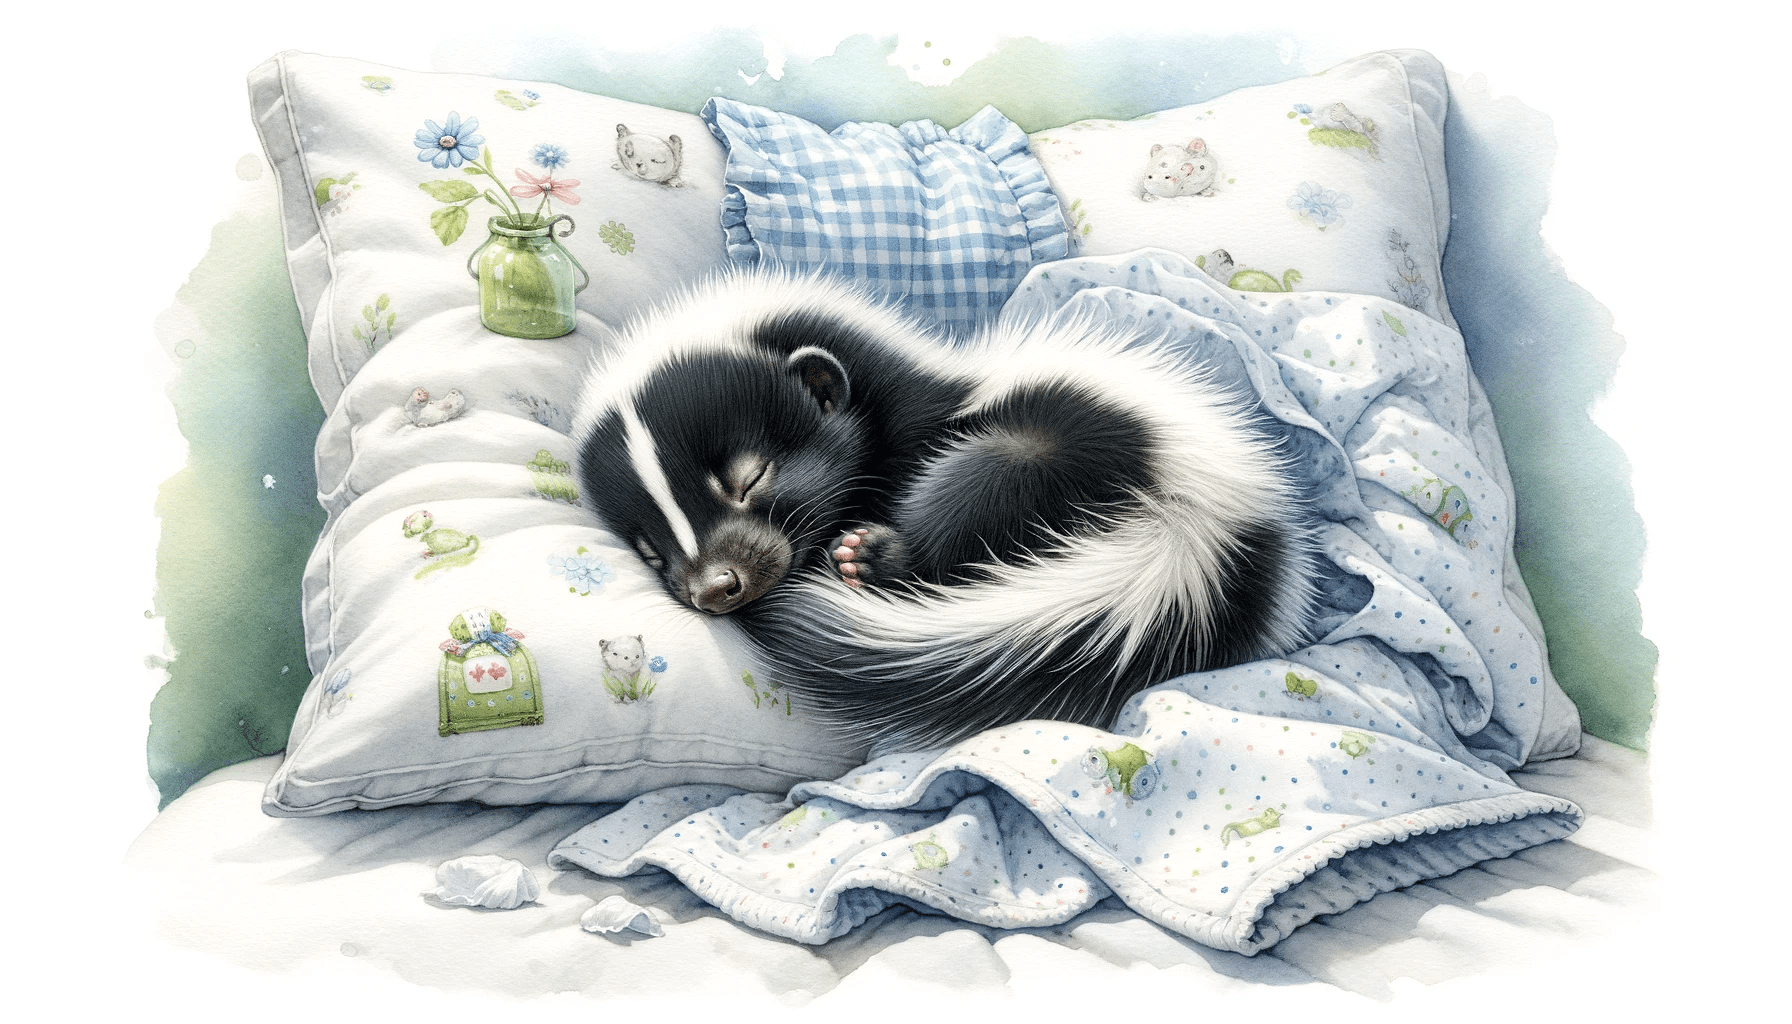 Baby Skunk Sleeping on a Pillow Painting